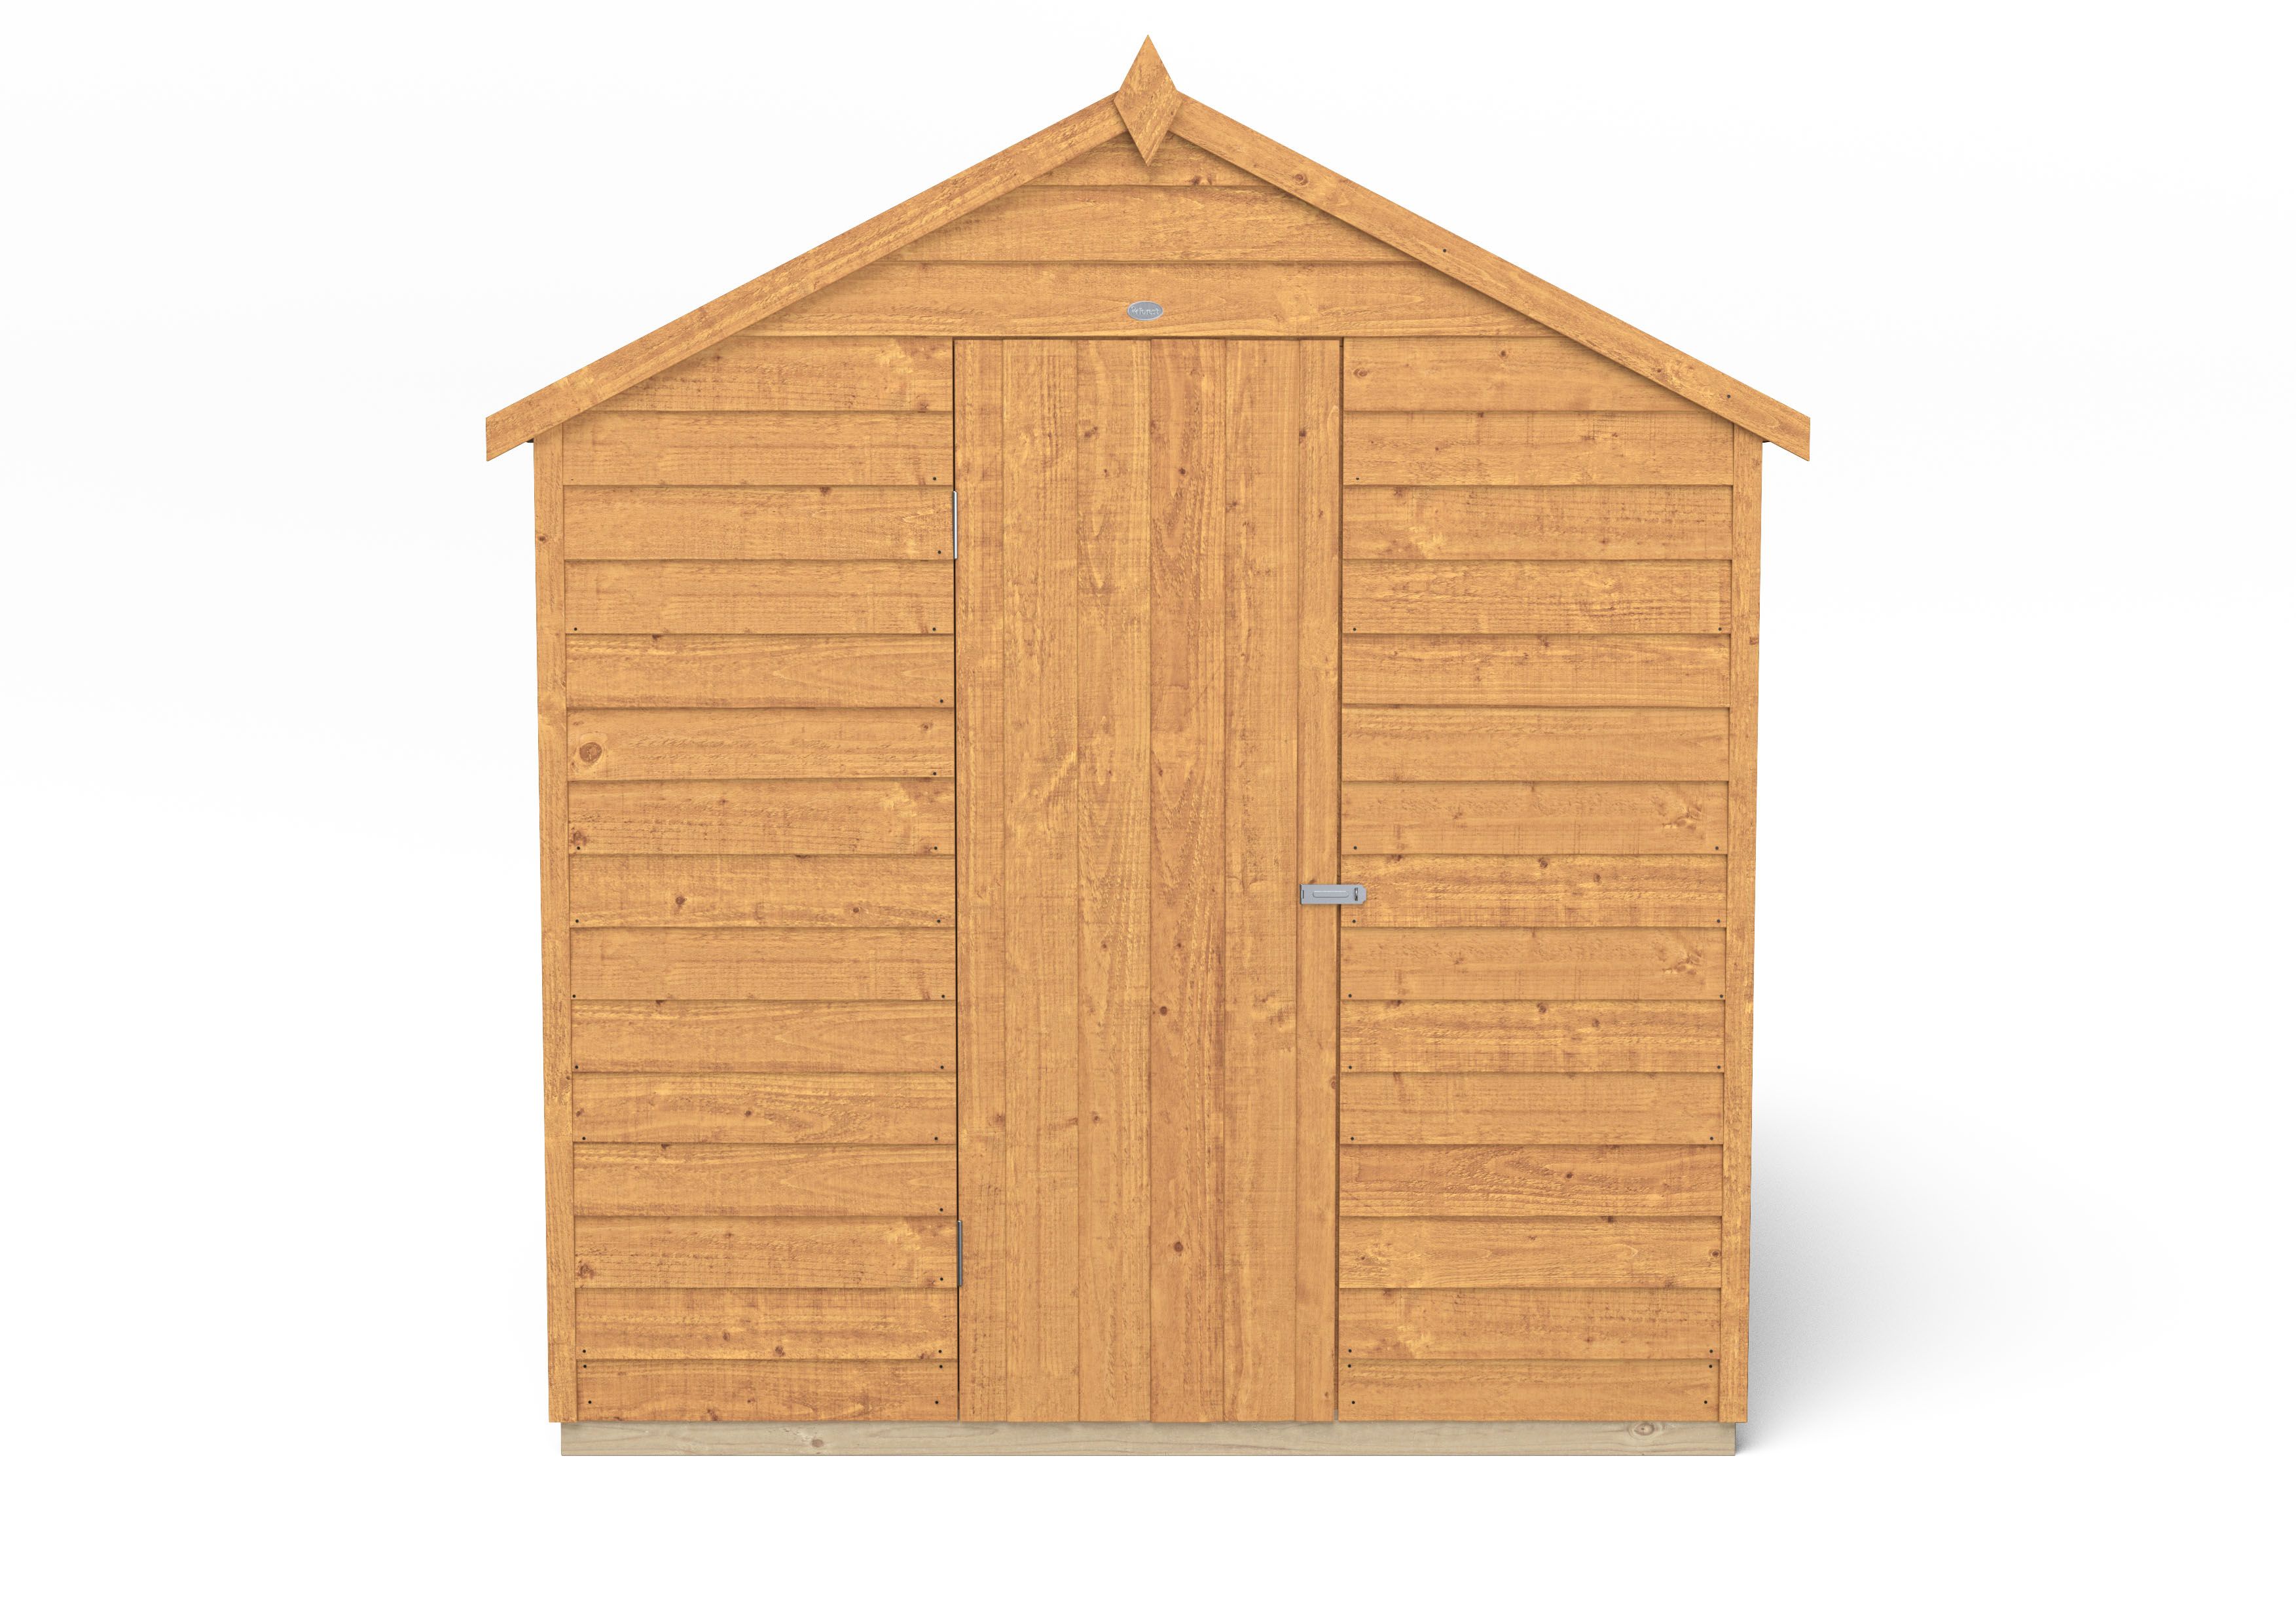 Forest Garden Overlap 8x6 ft Apex Wooden Dip treated Shed with floor & 2 windows (Base included)